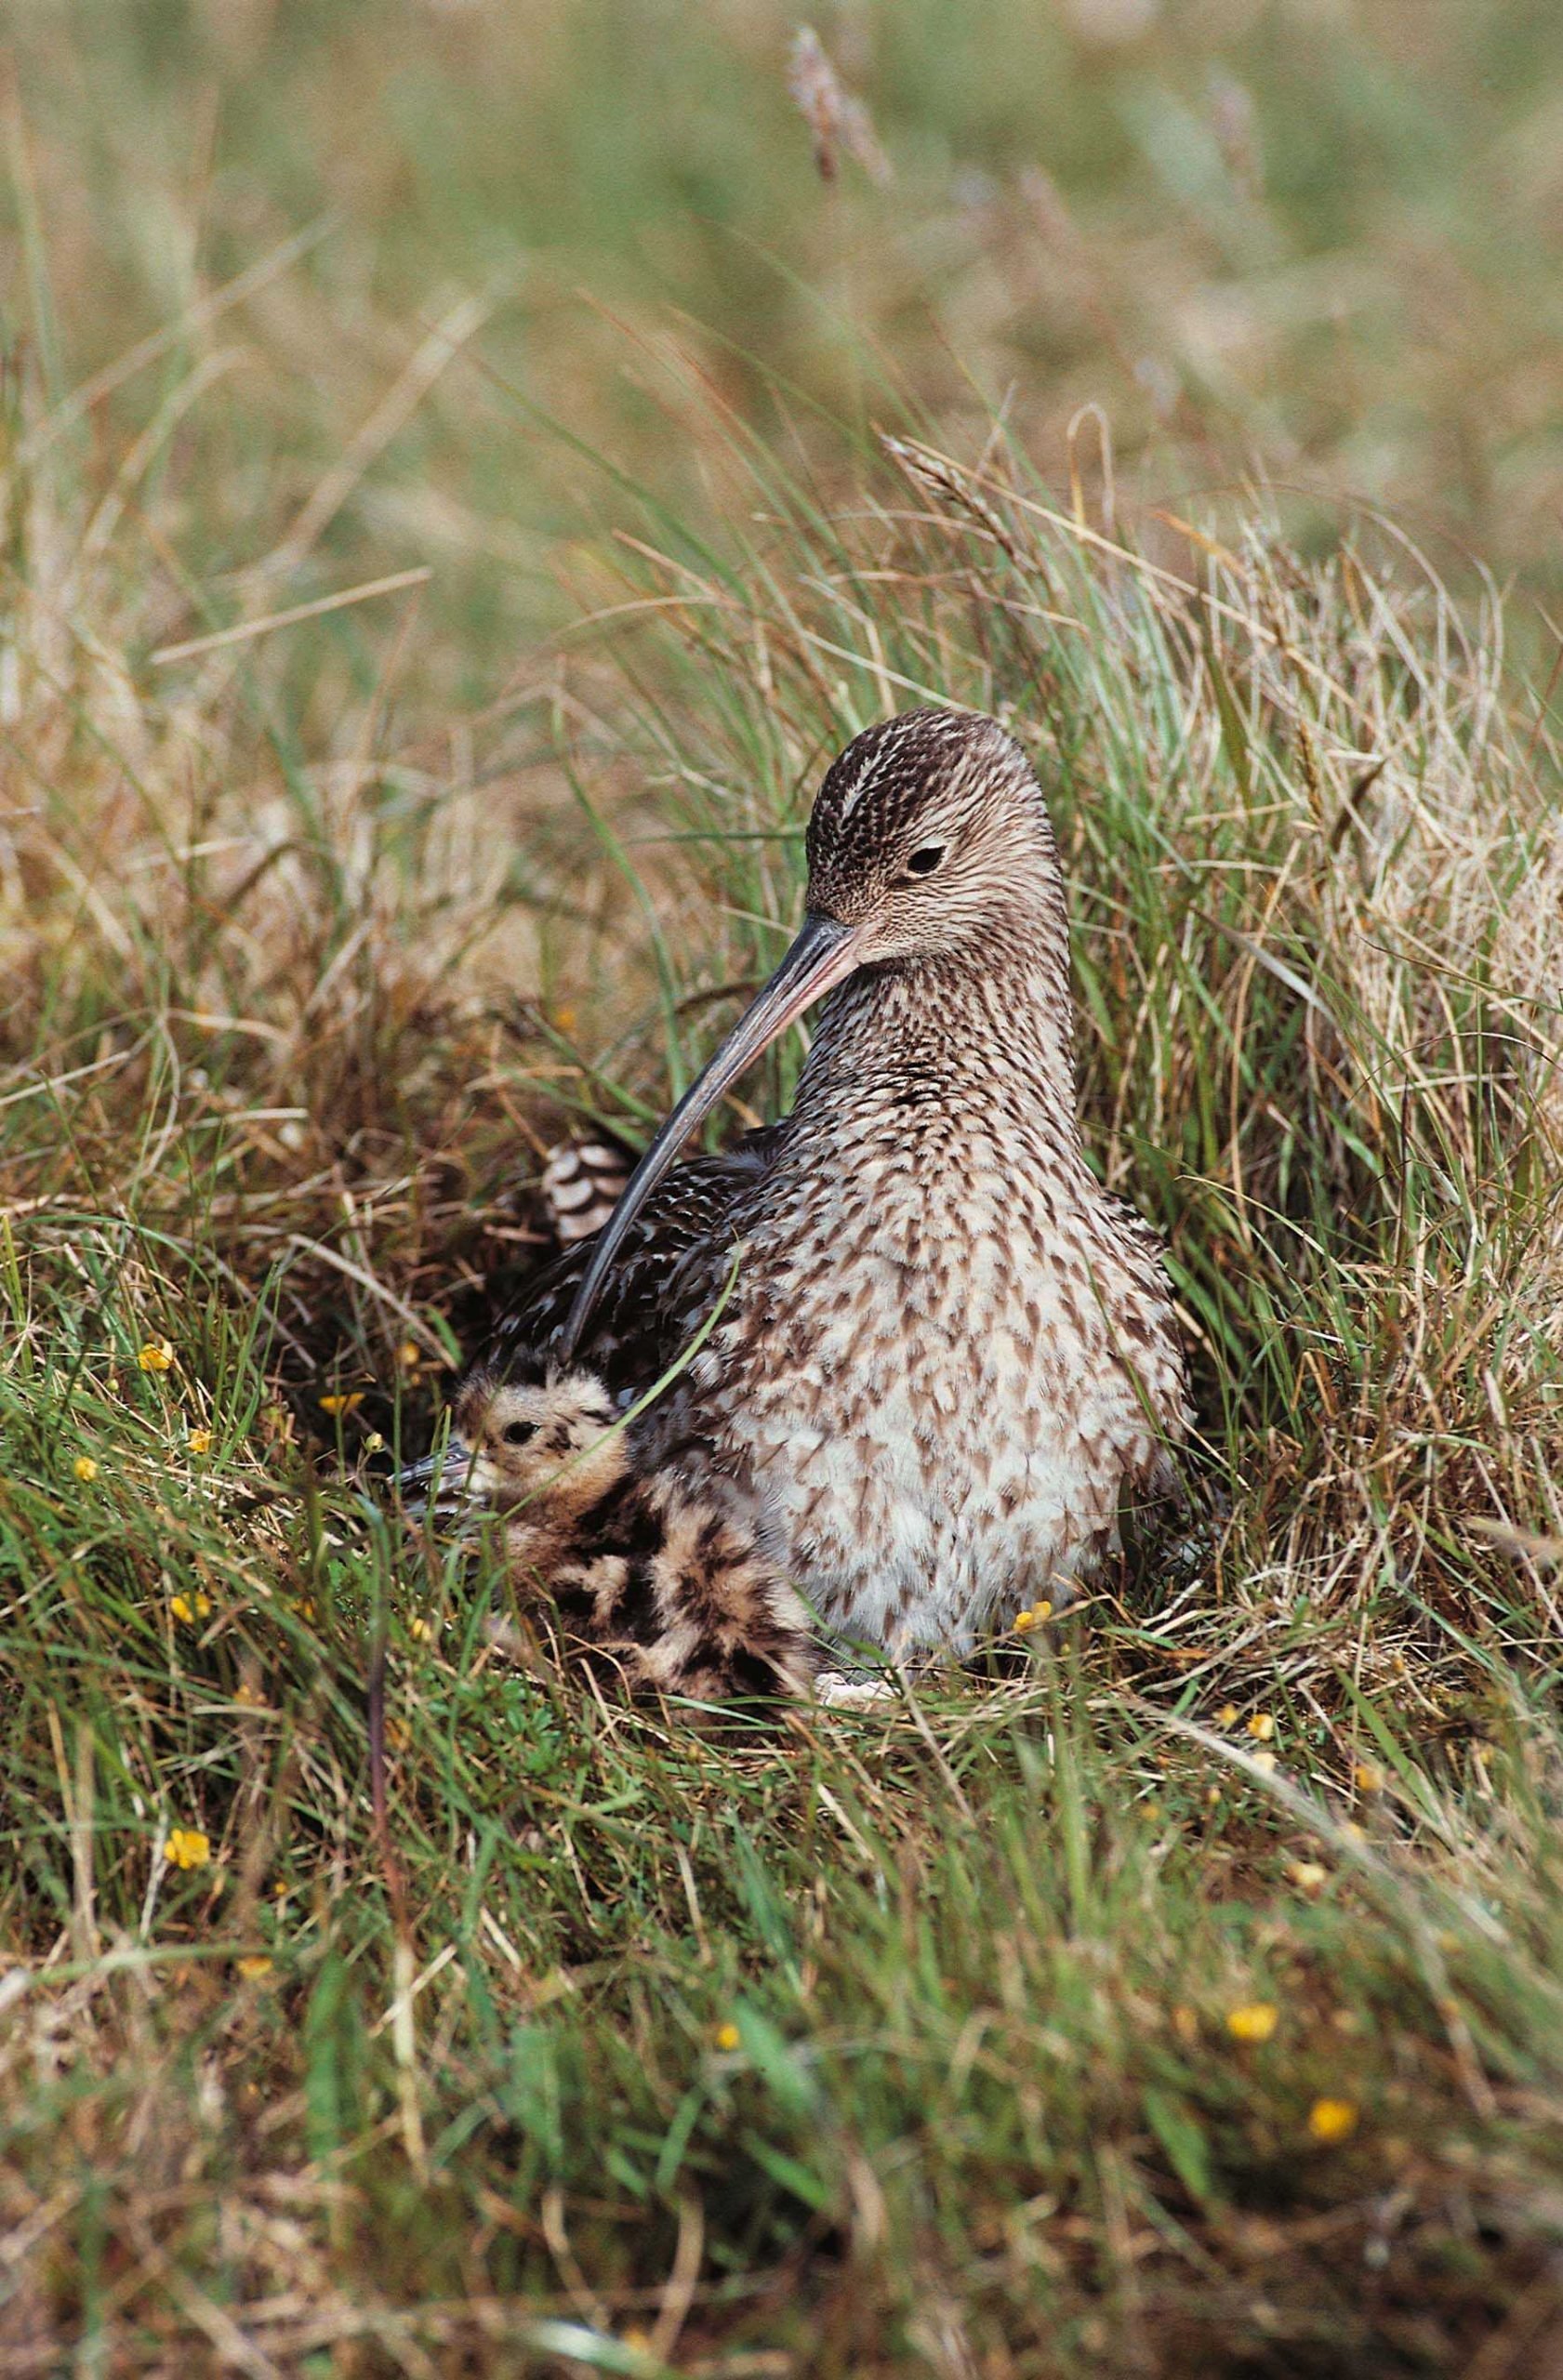 A curlew in the grass watching over it's chick next to it